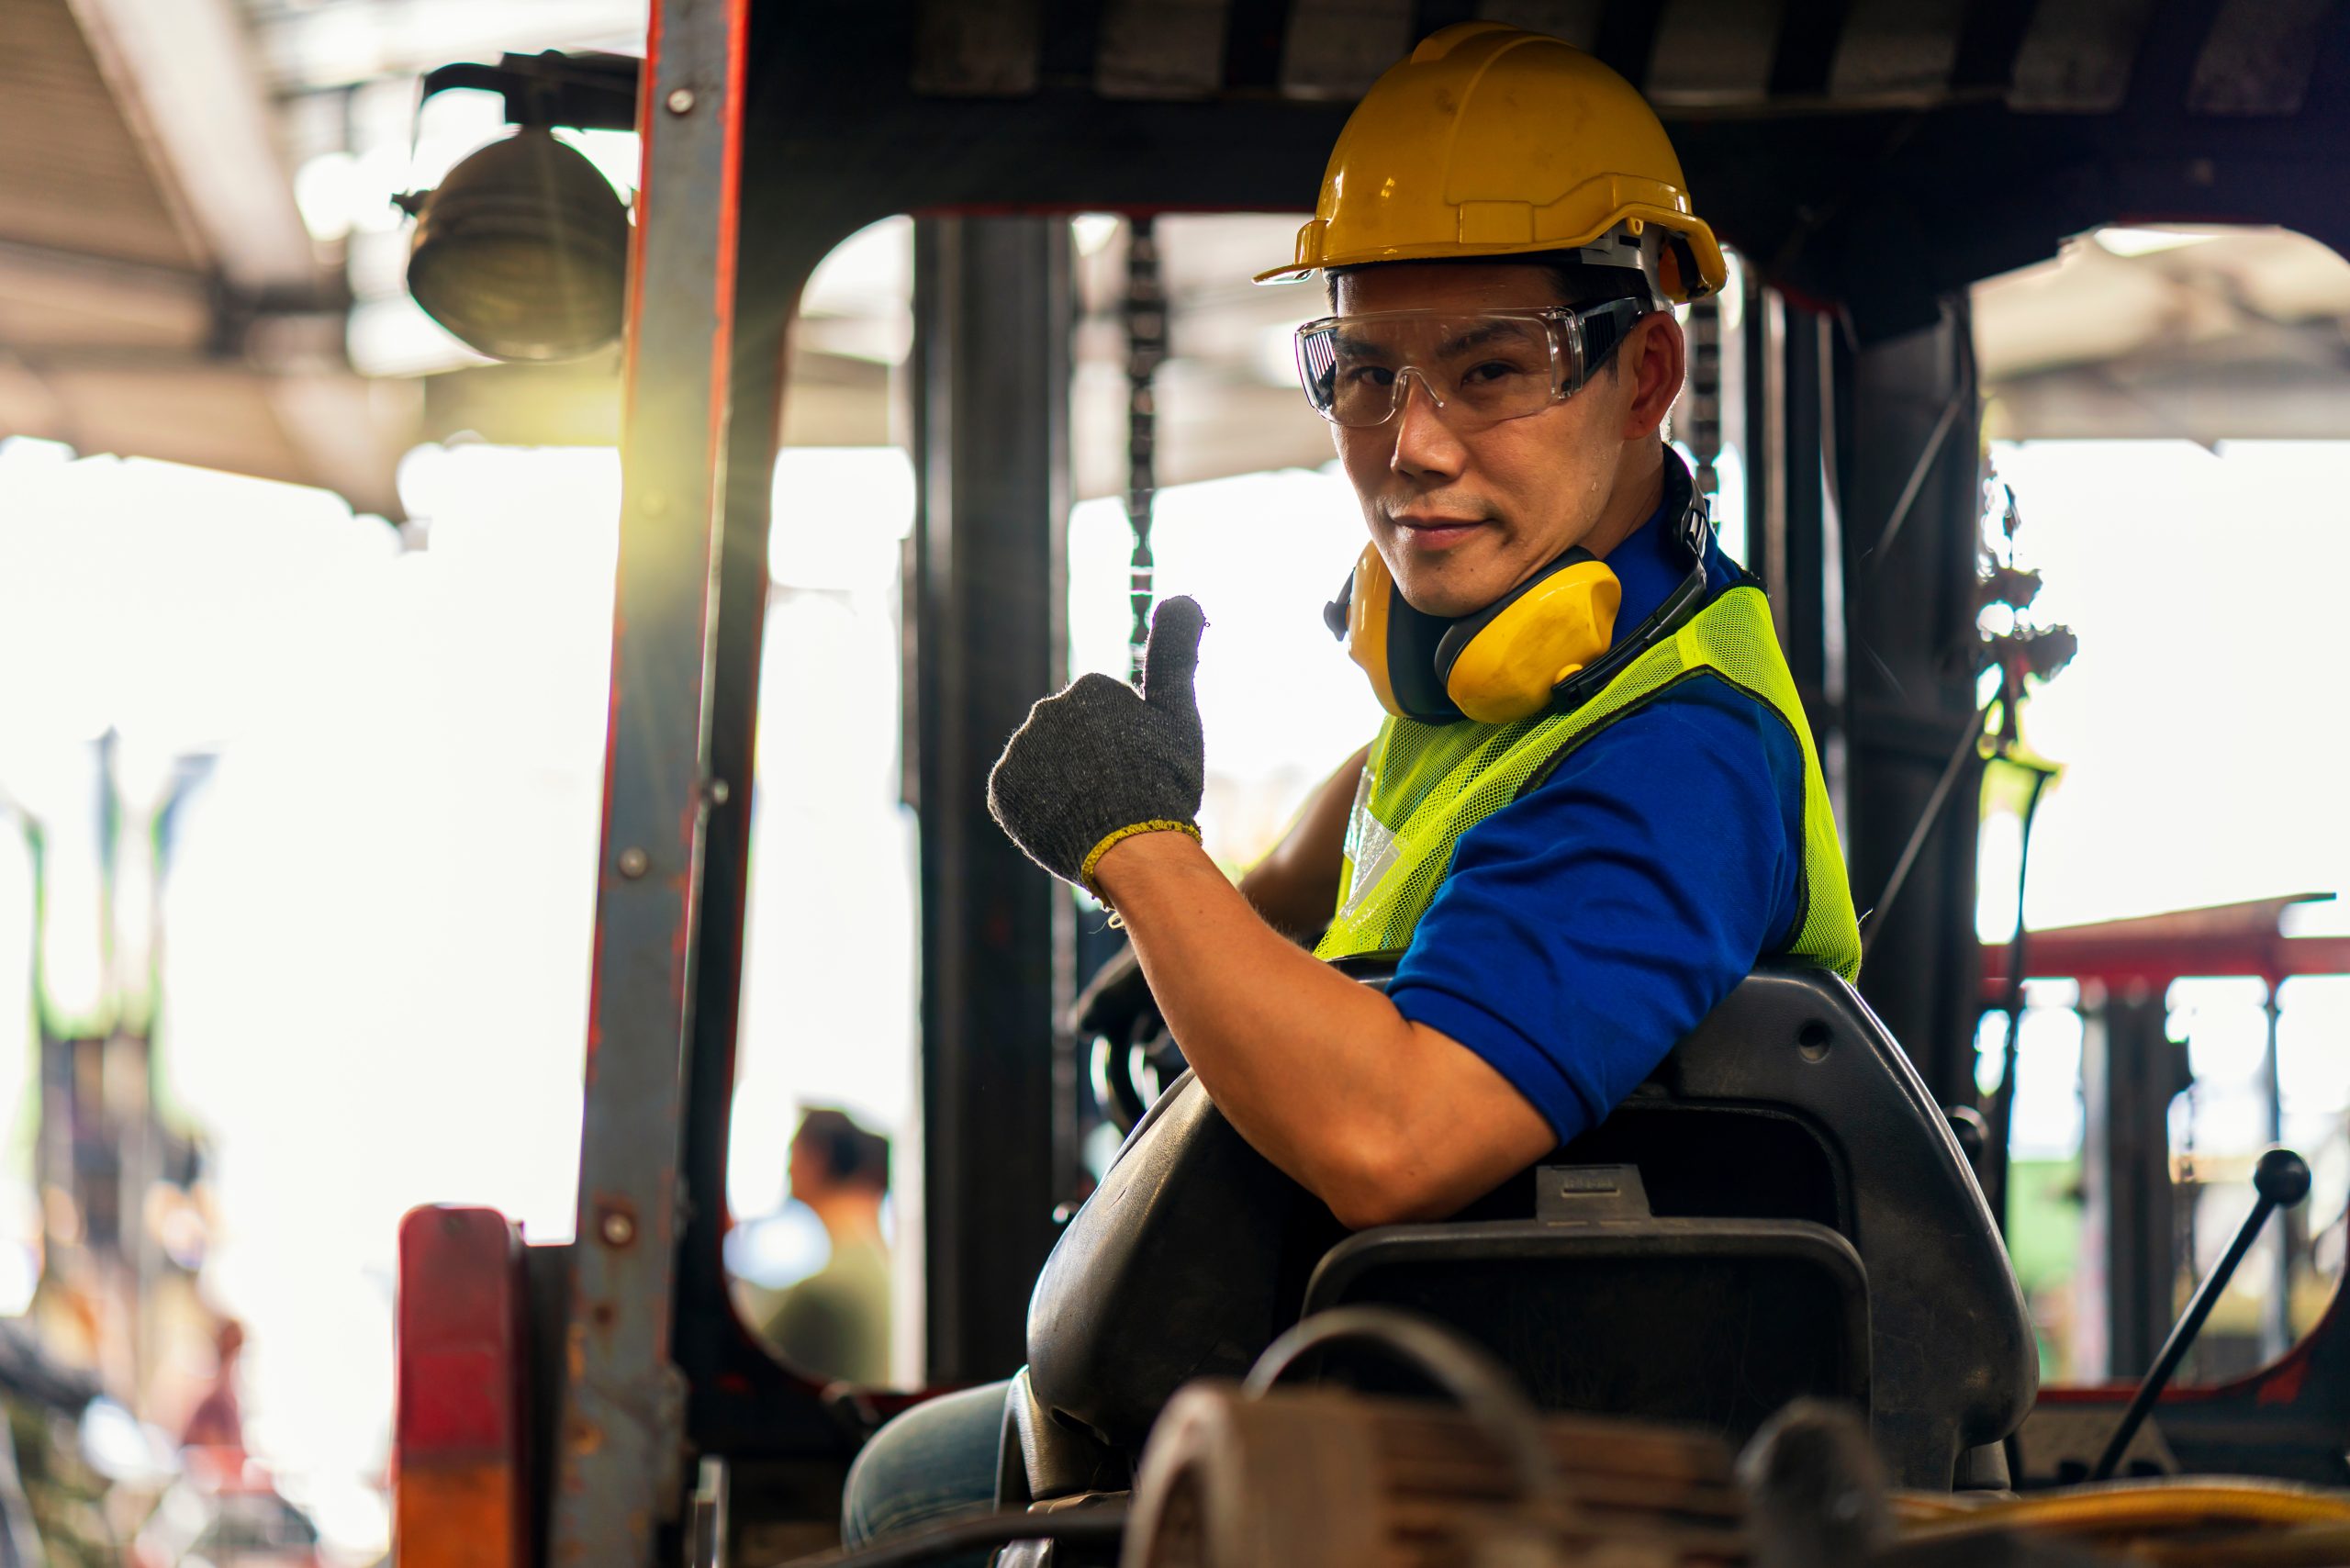 A male Engineer or technician driving a forklift. The driver is wearing eye protection to help prevent eye injuries.